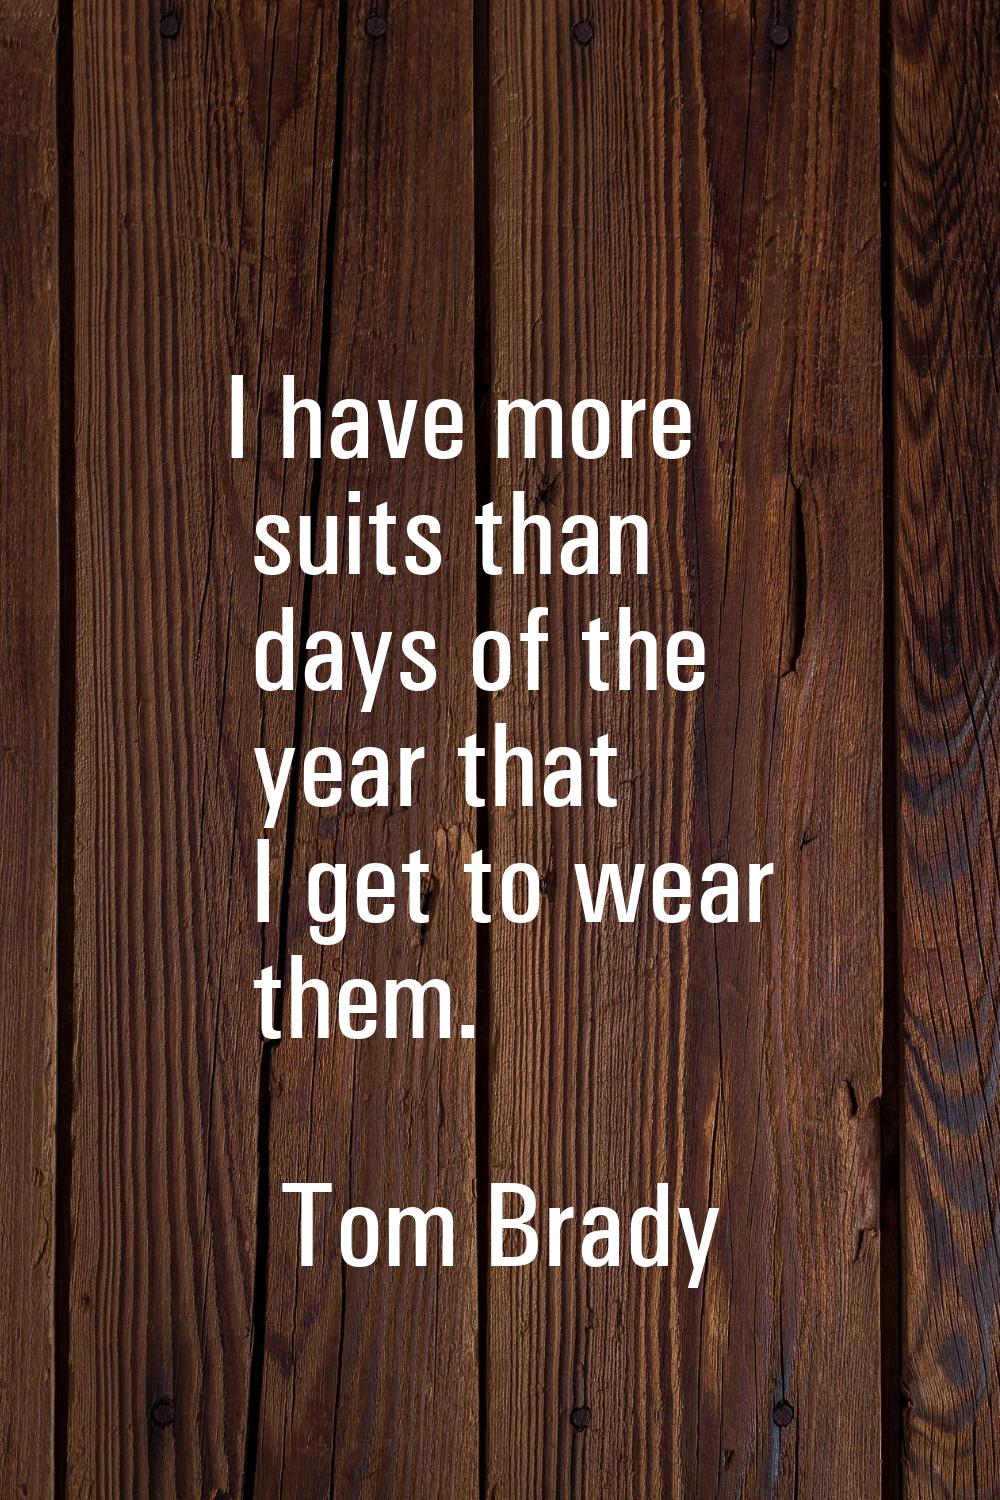 I have more suits than days of the year that I get to wear them.